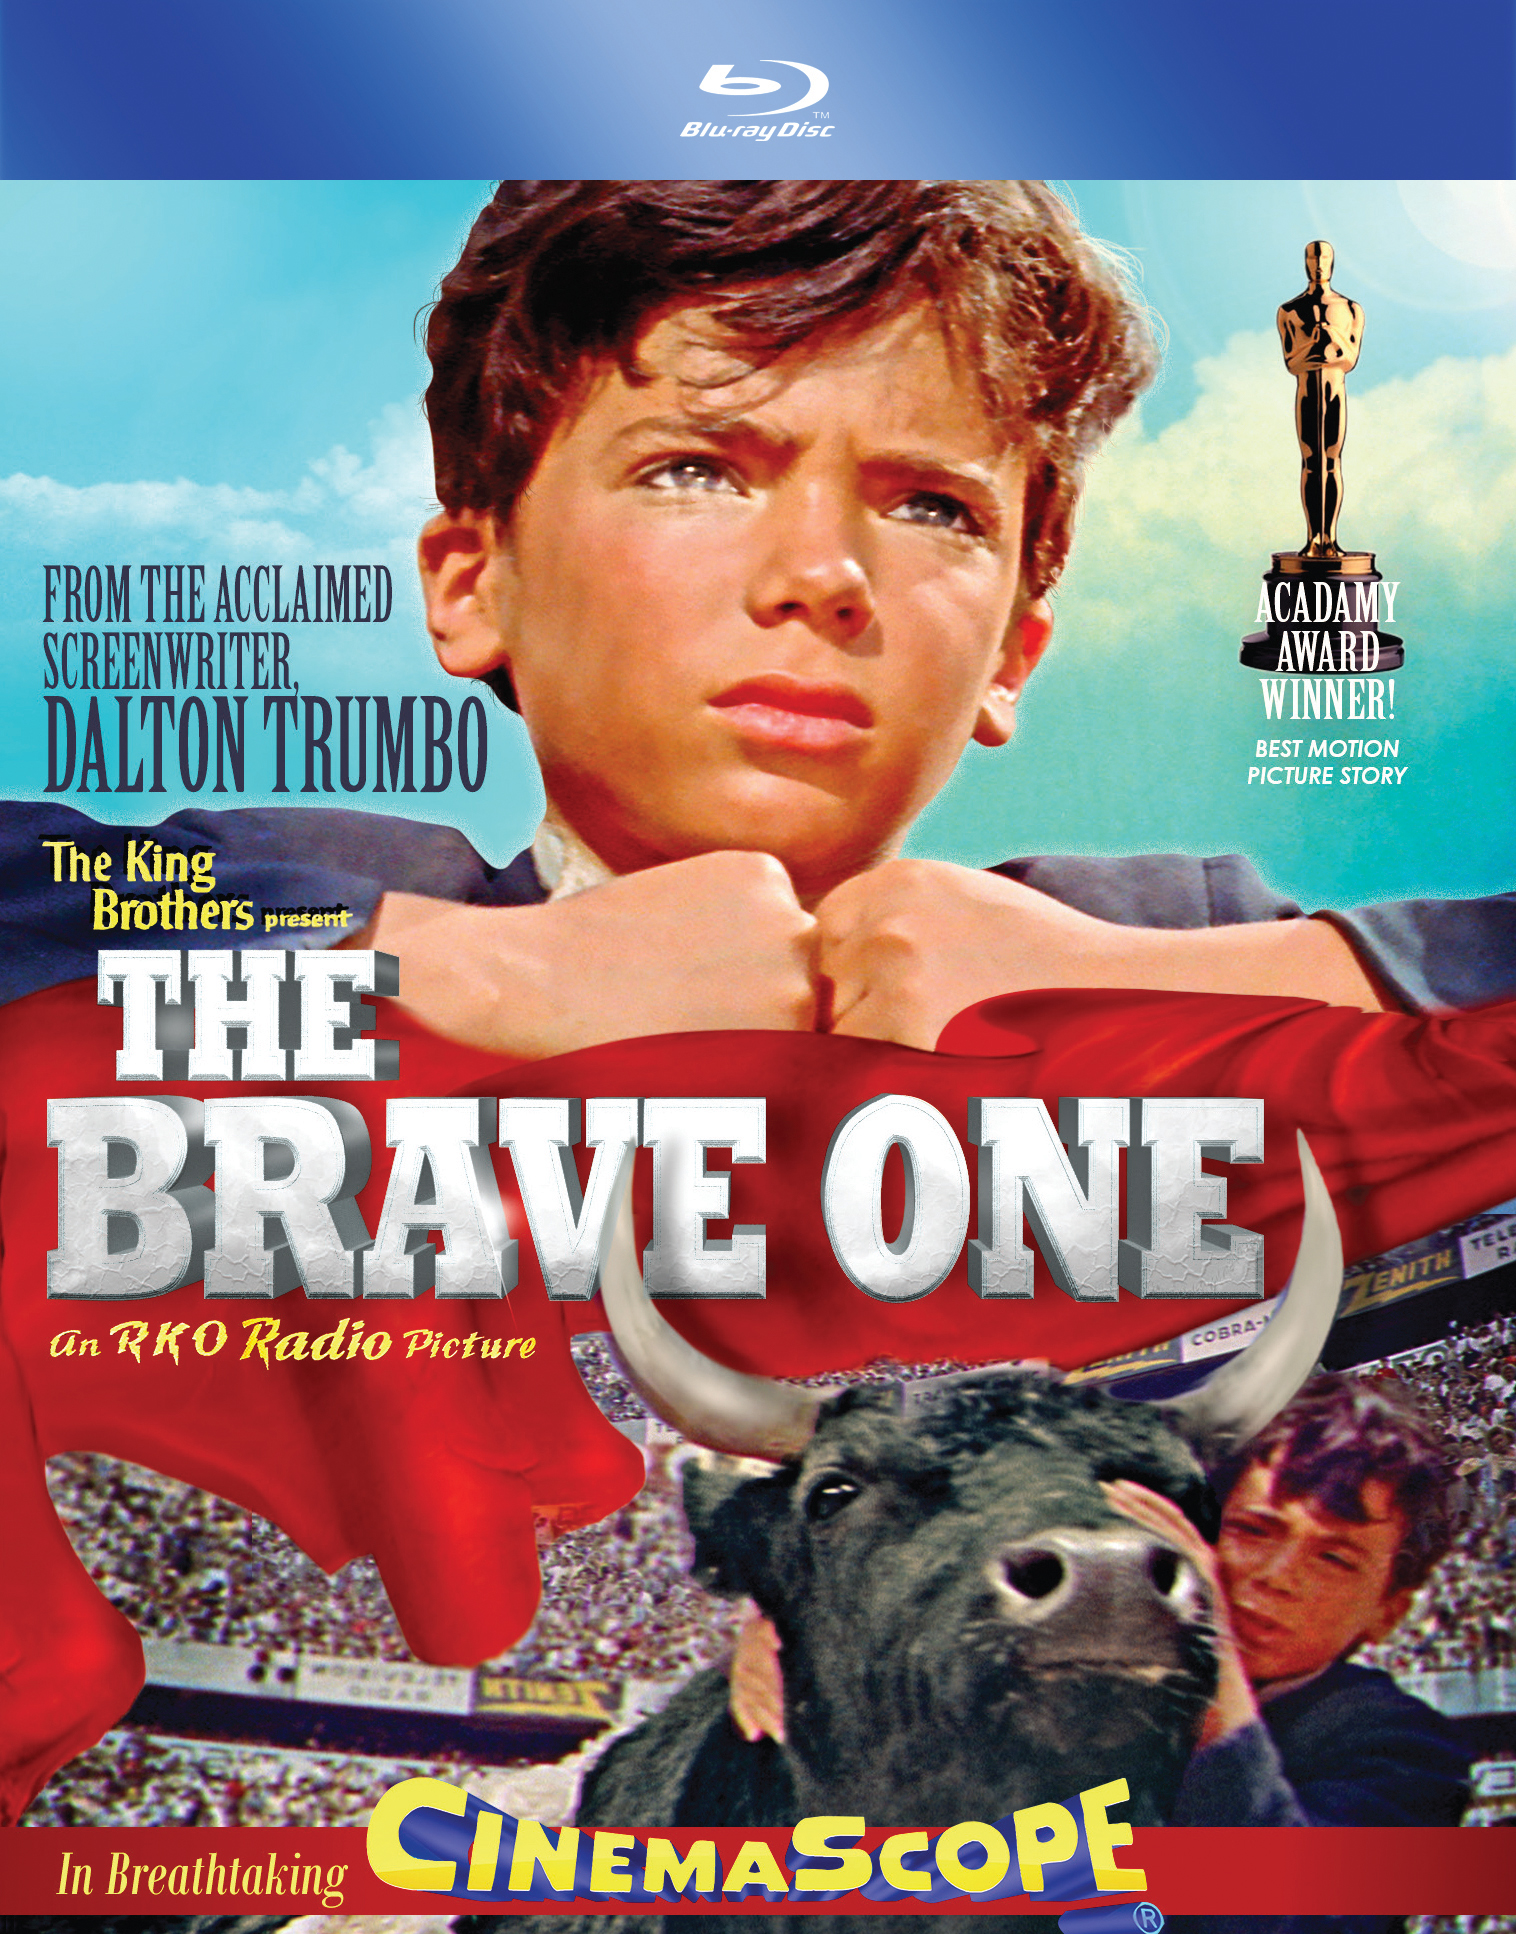 The Brave One (Blu-ray, 1956) for sale online